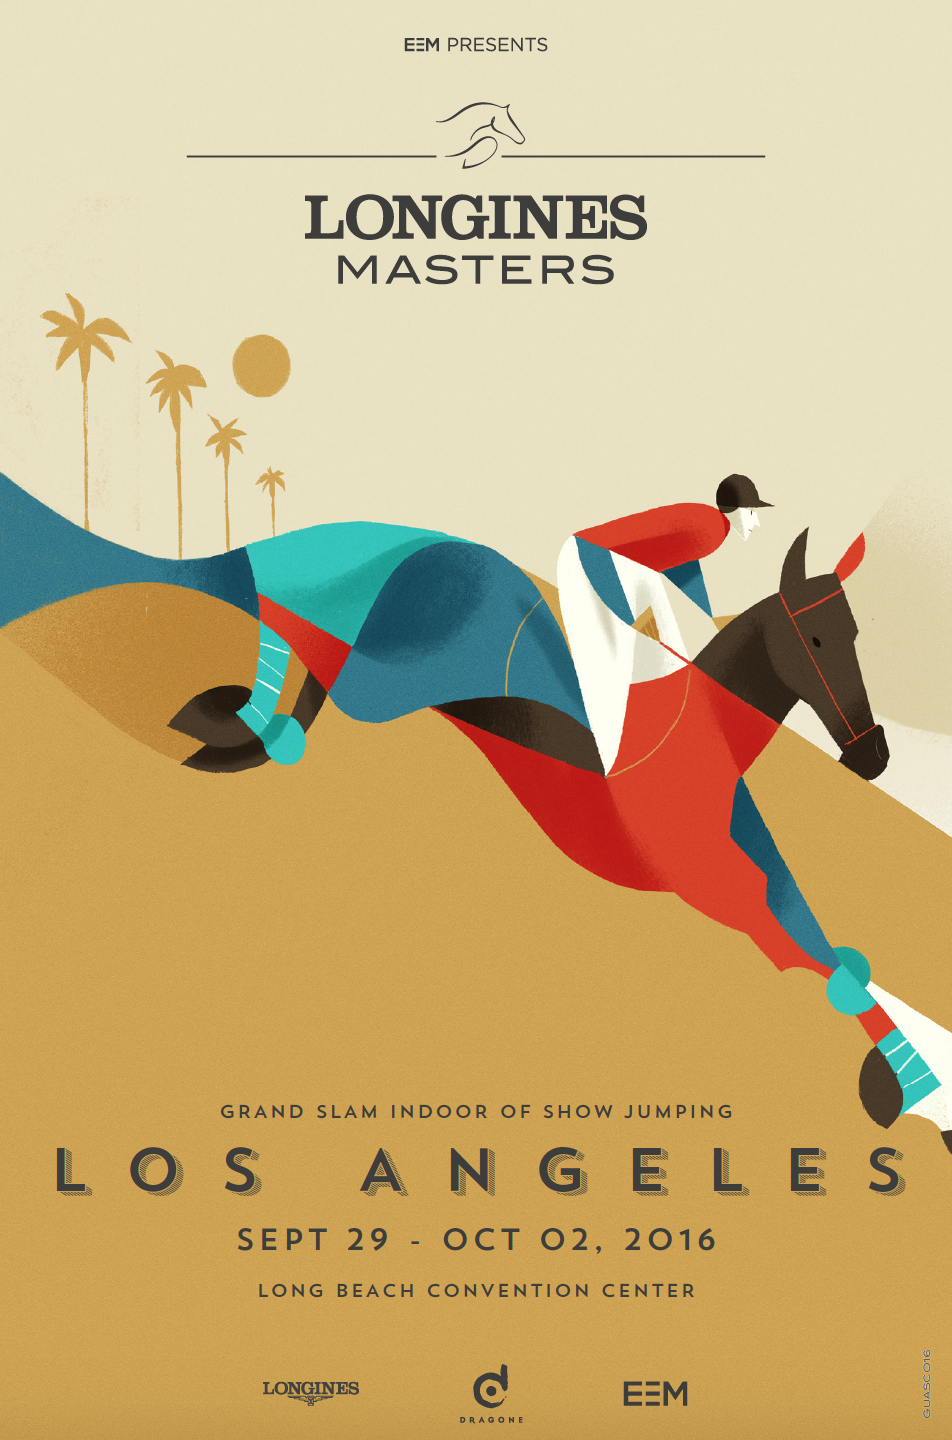 Longines Masters Los Angeles finds a new home in Long Beach